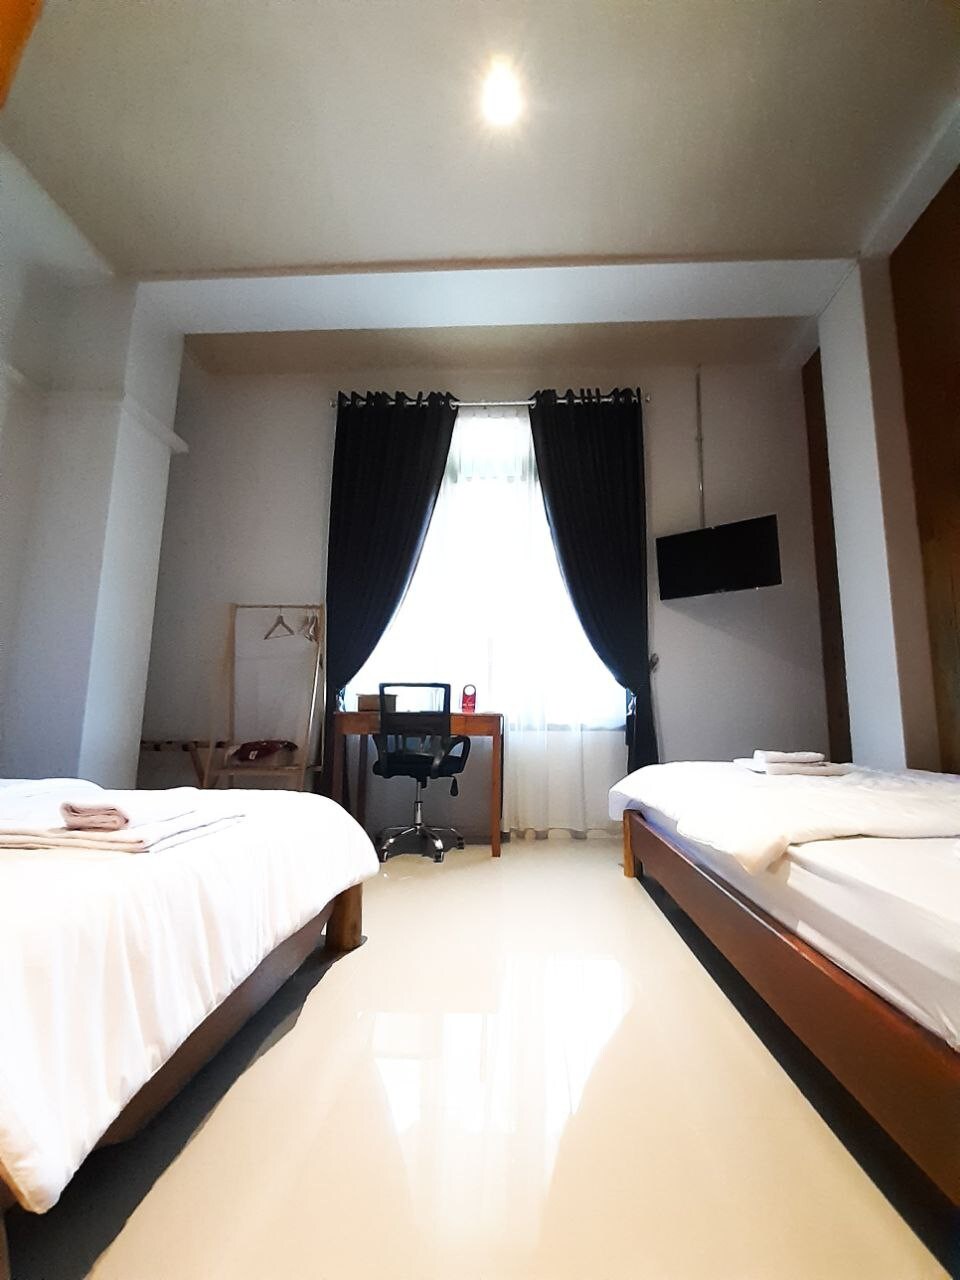 New York Room-a Boutique Hotel in Banda Aceh